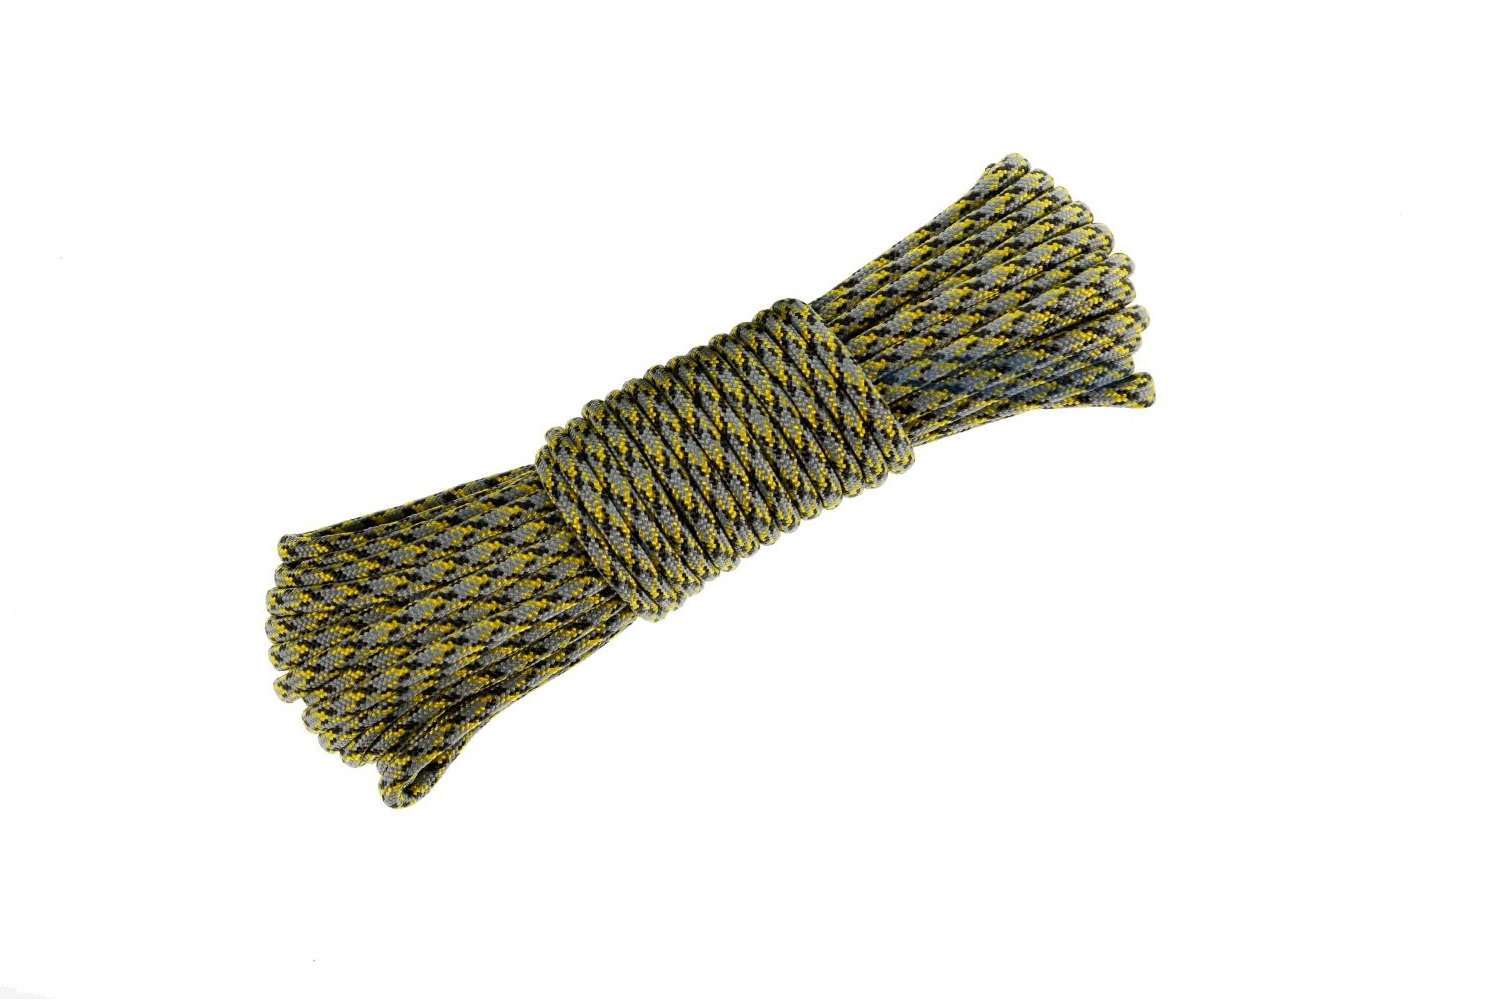 PARACORD 550 WITH KEVLAR